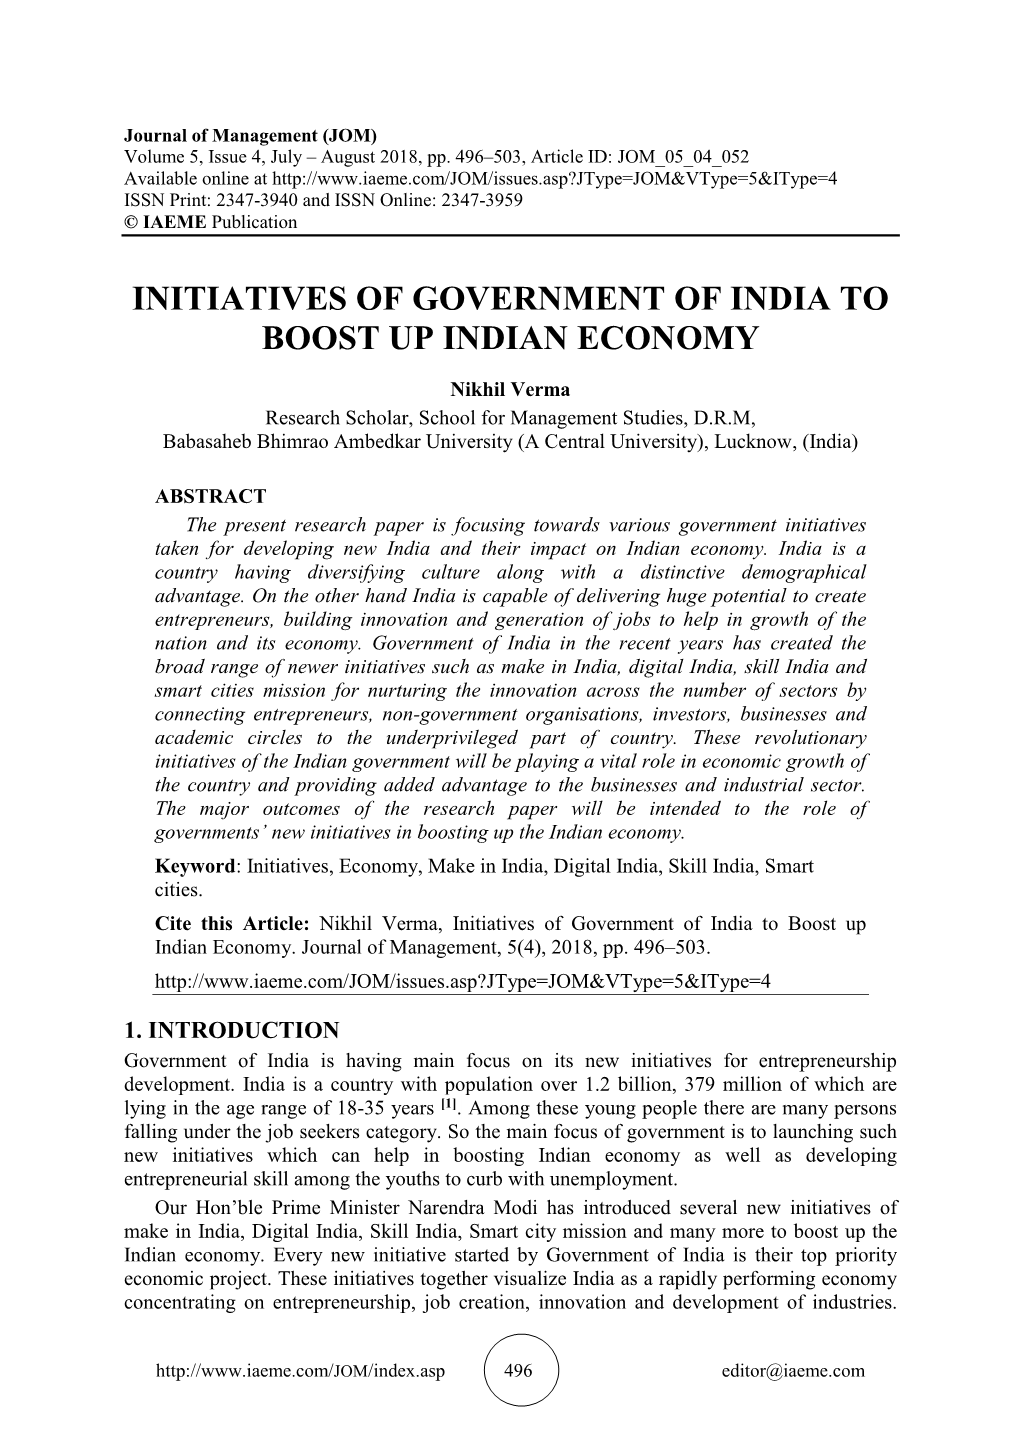 Initiatives of Government of India to Boost up Indian Economy